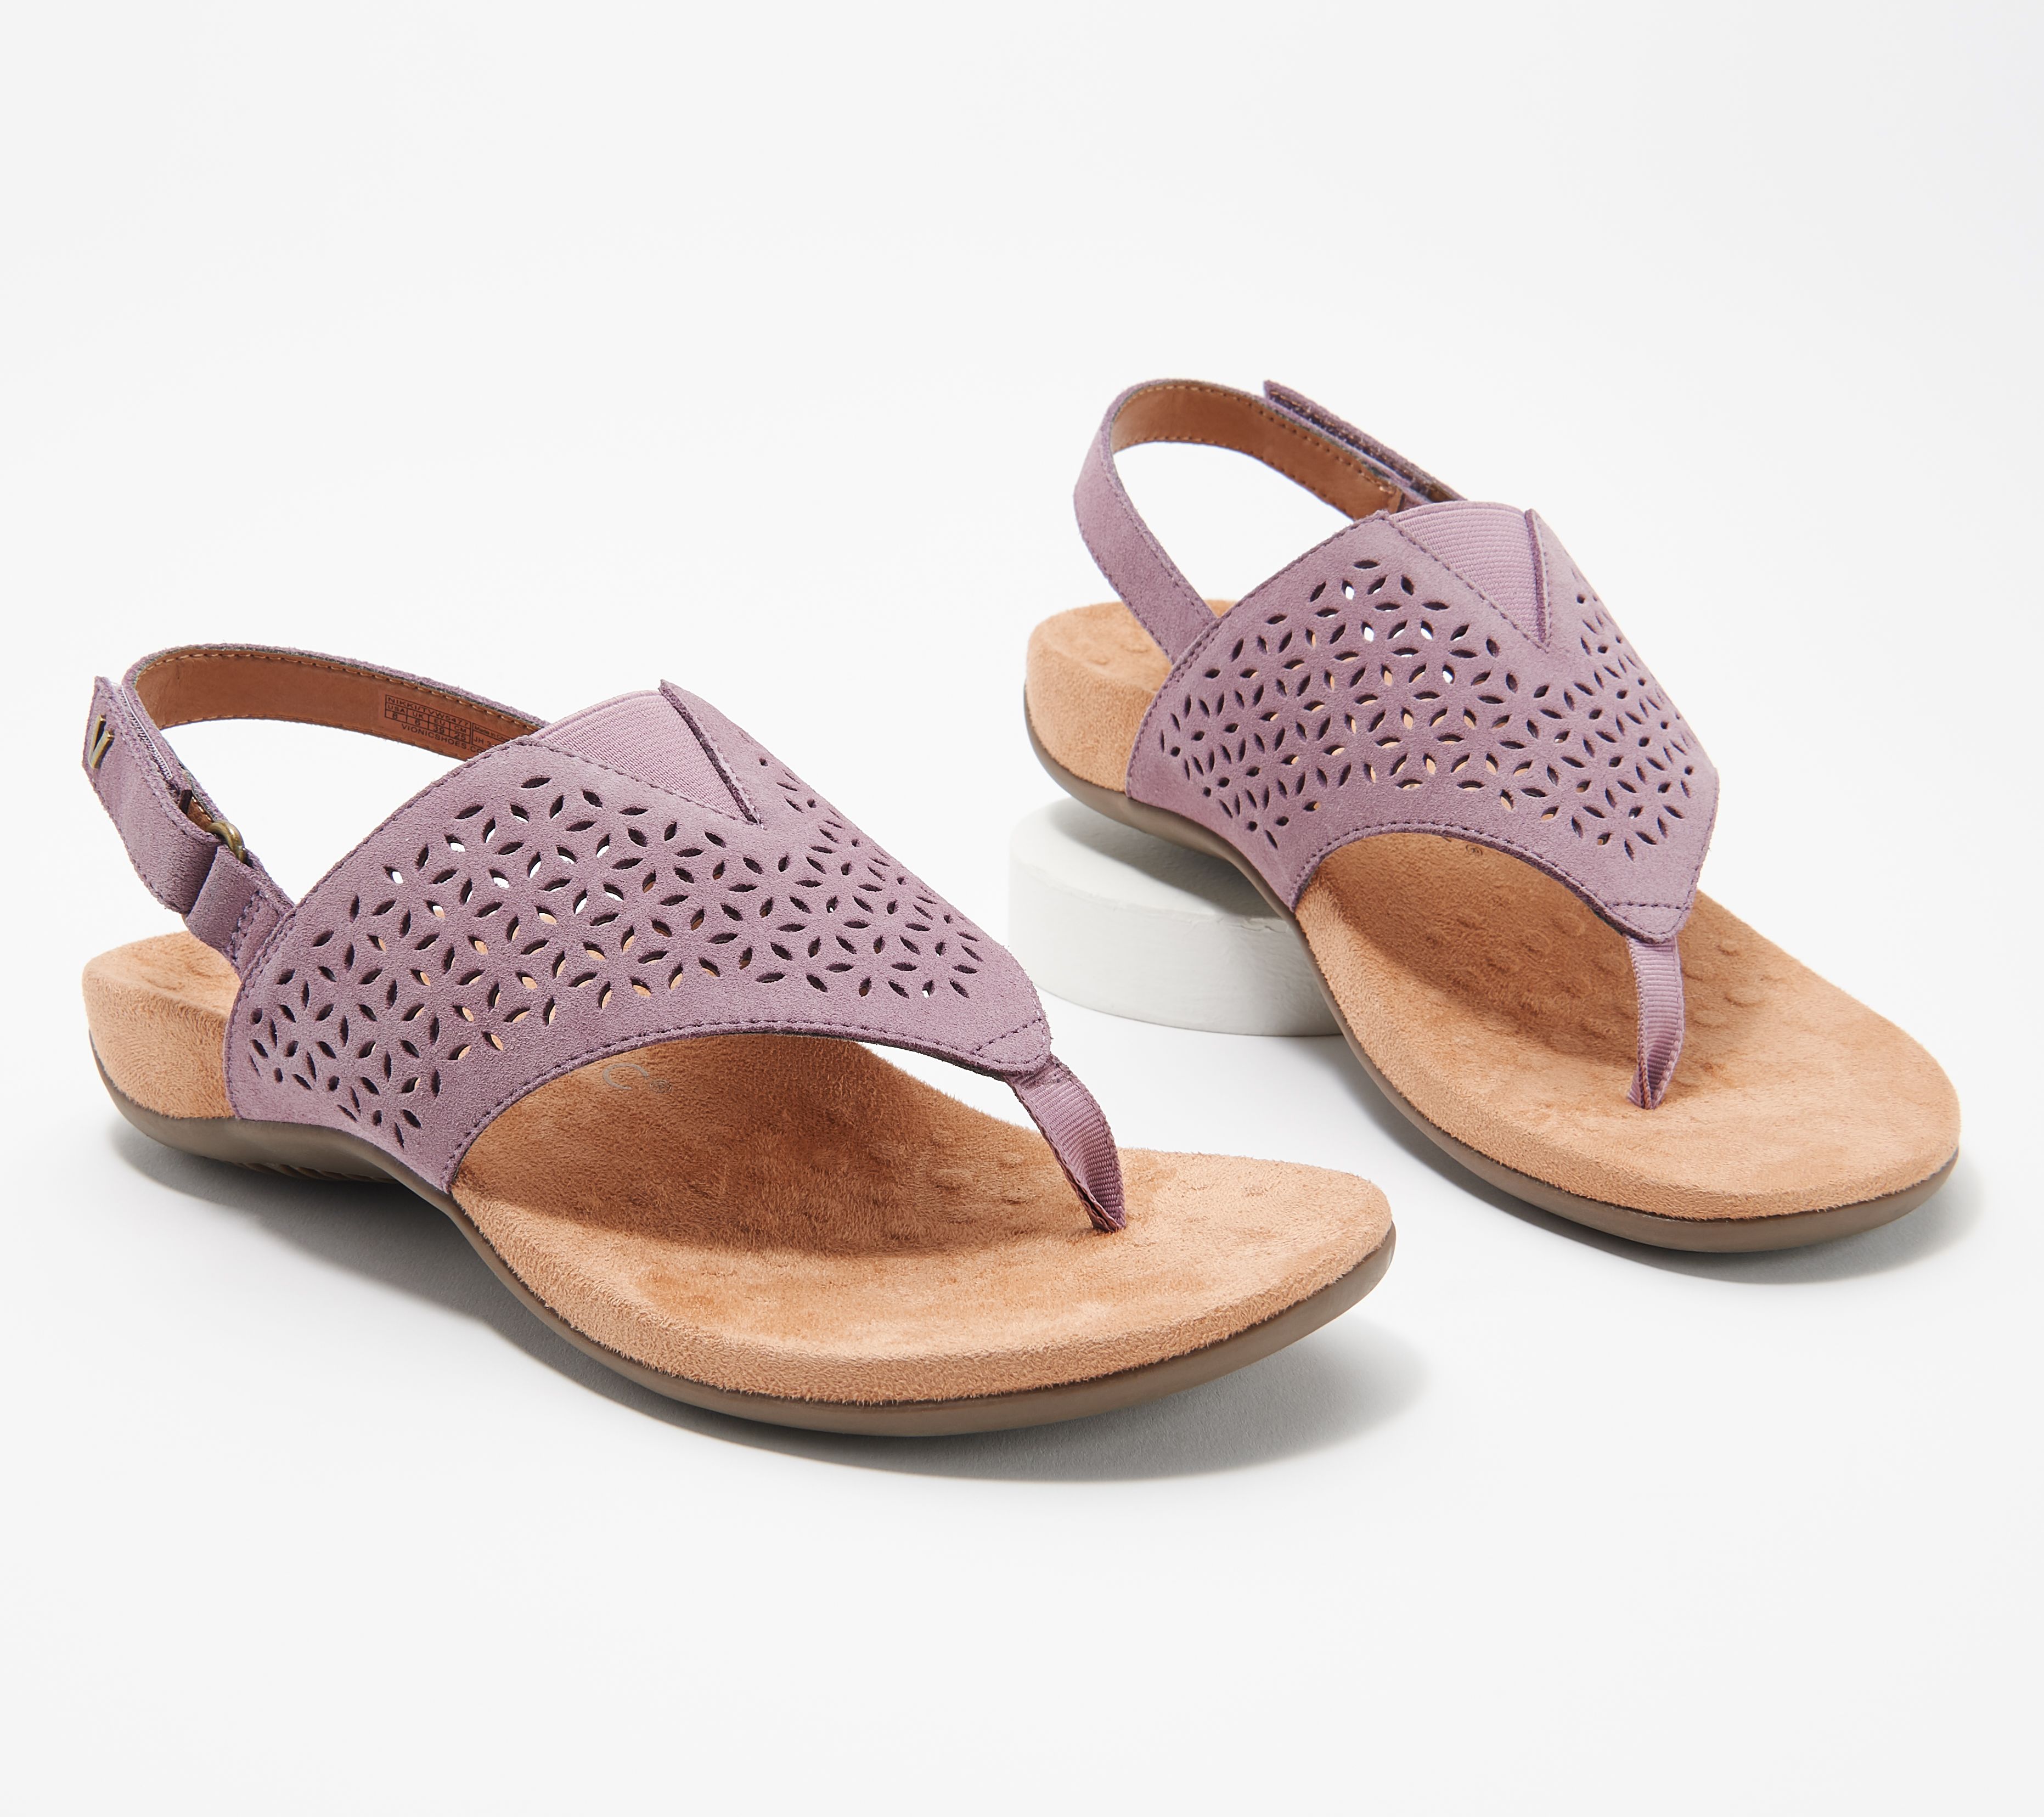 Vionic Perforated T-Strap Sandals 